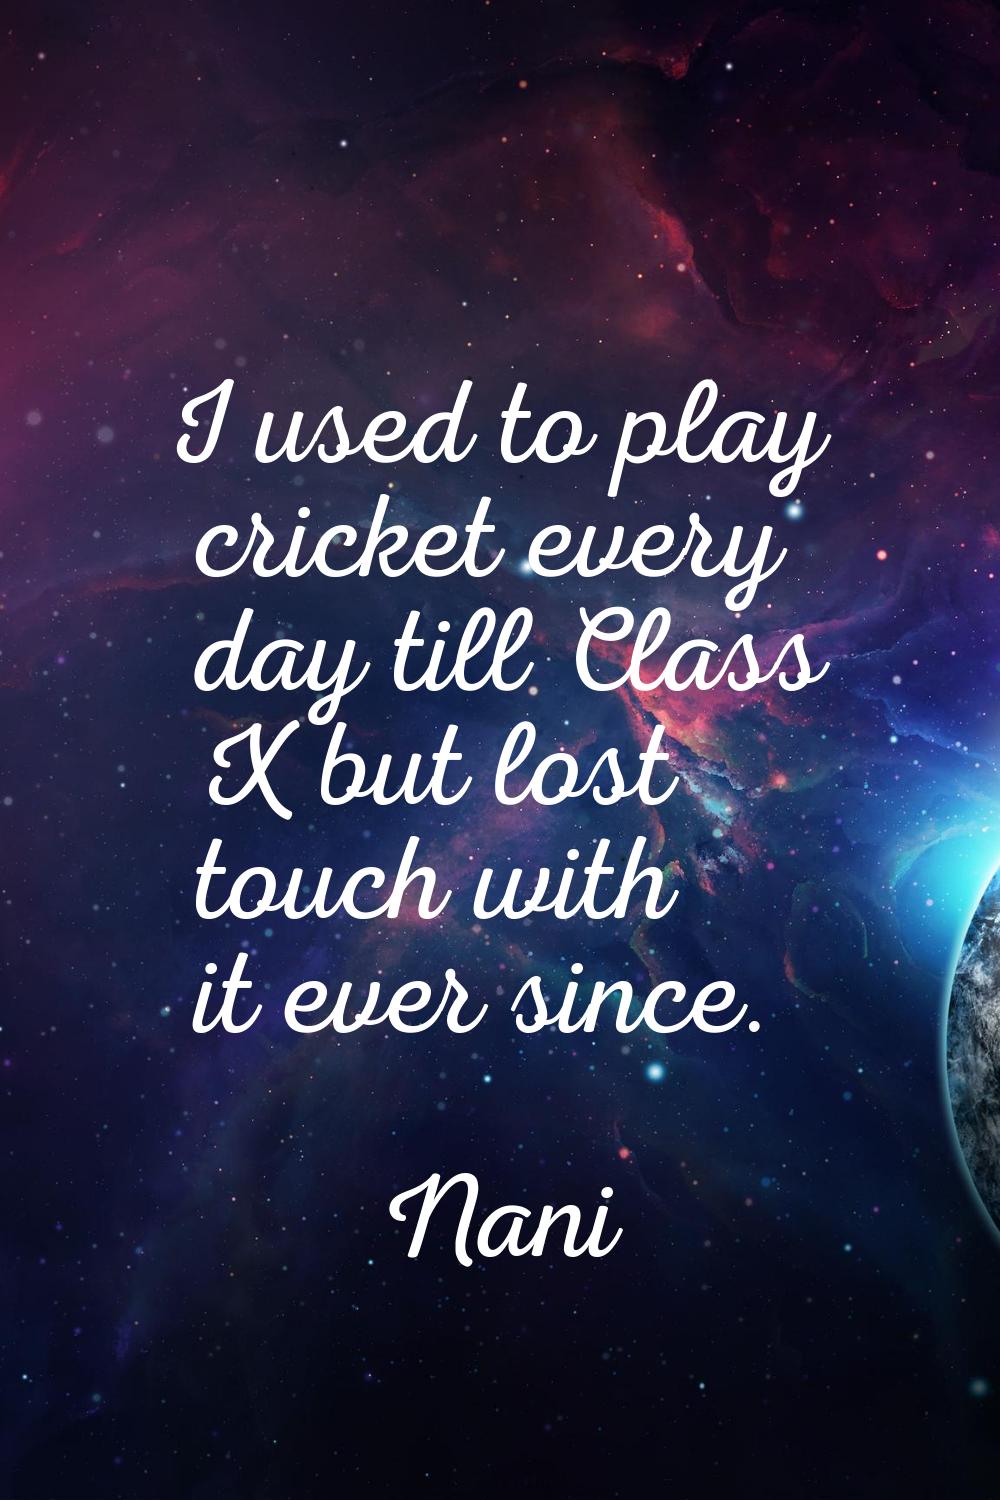 I used to play cricket every day till Class X but lost touch with it ever since.